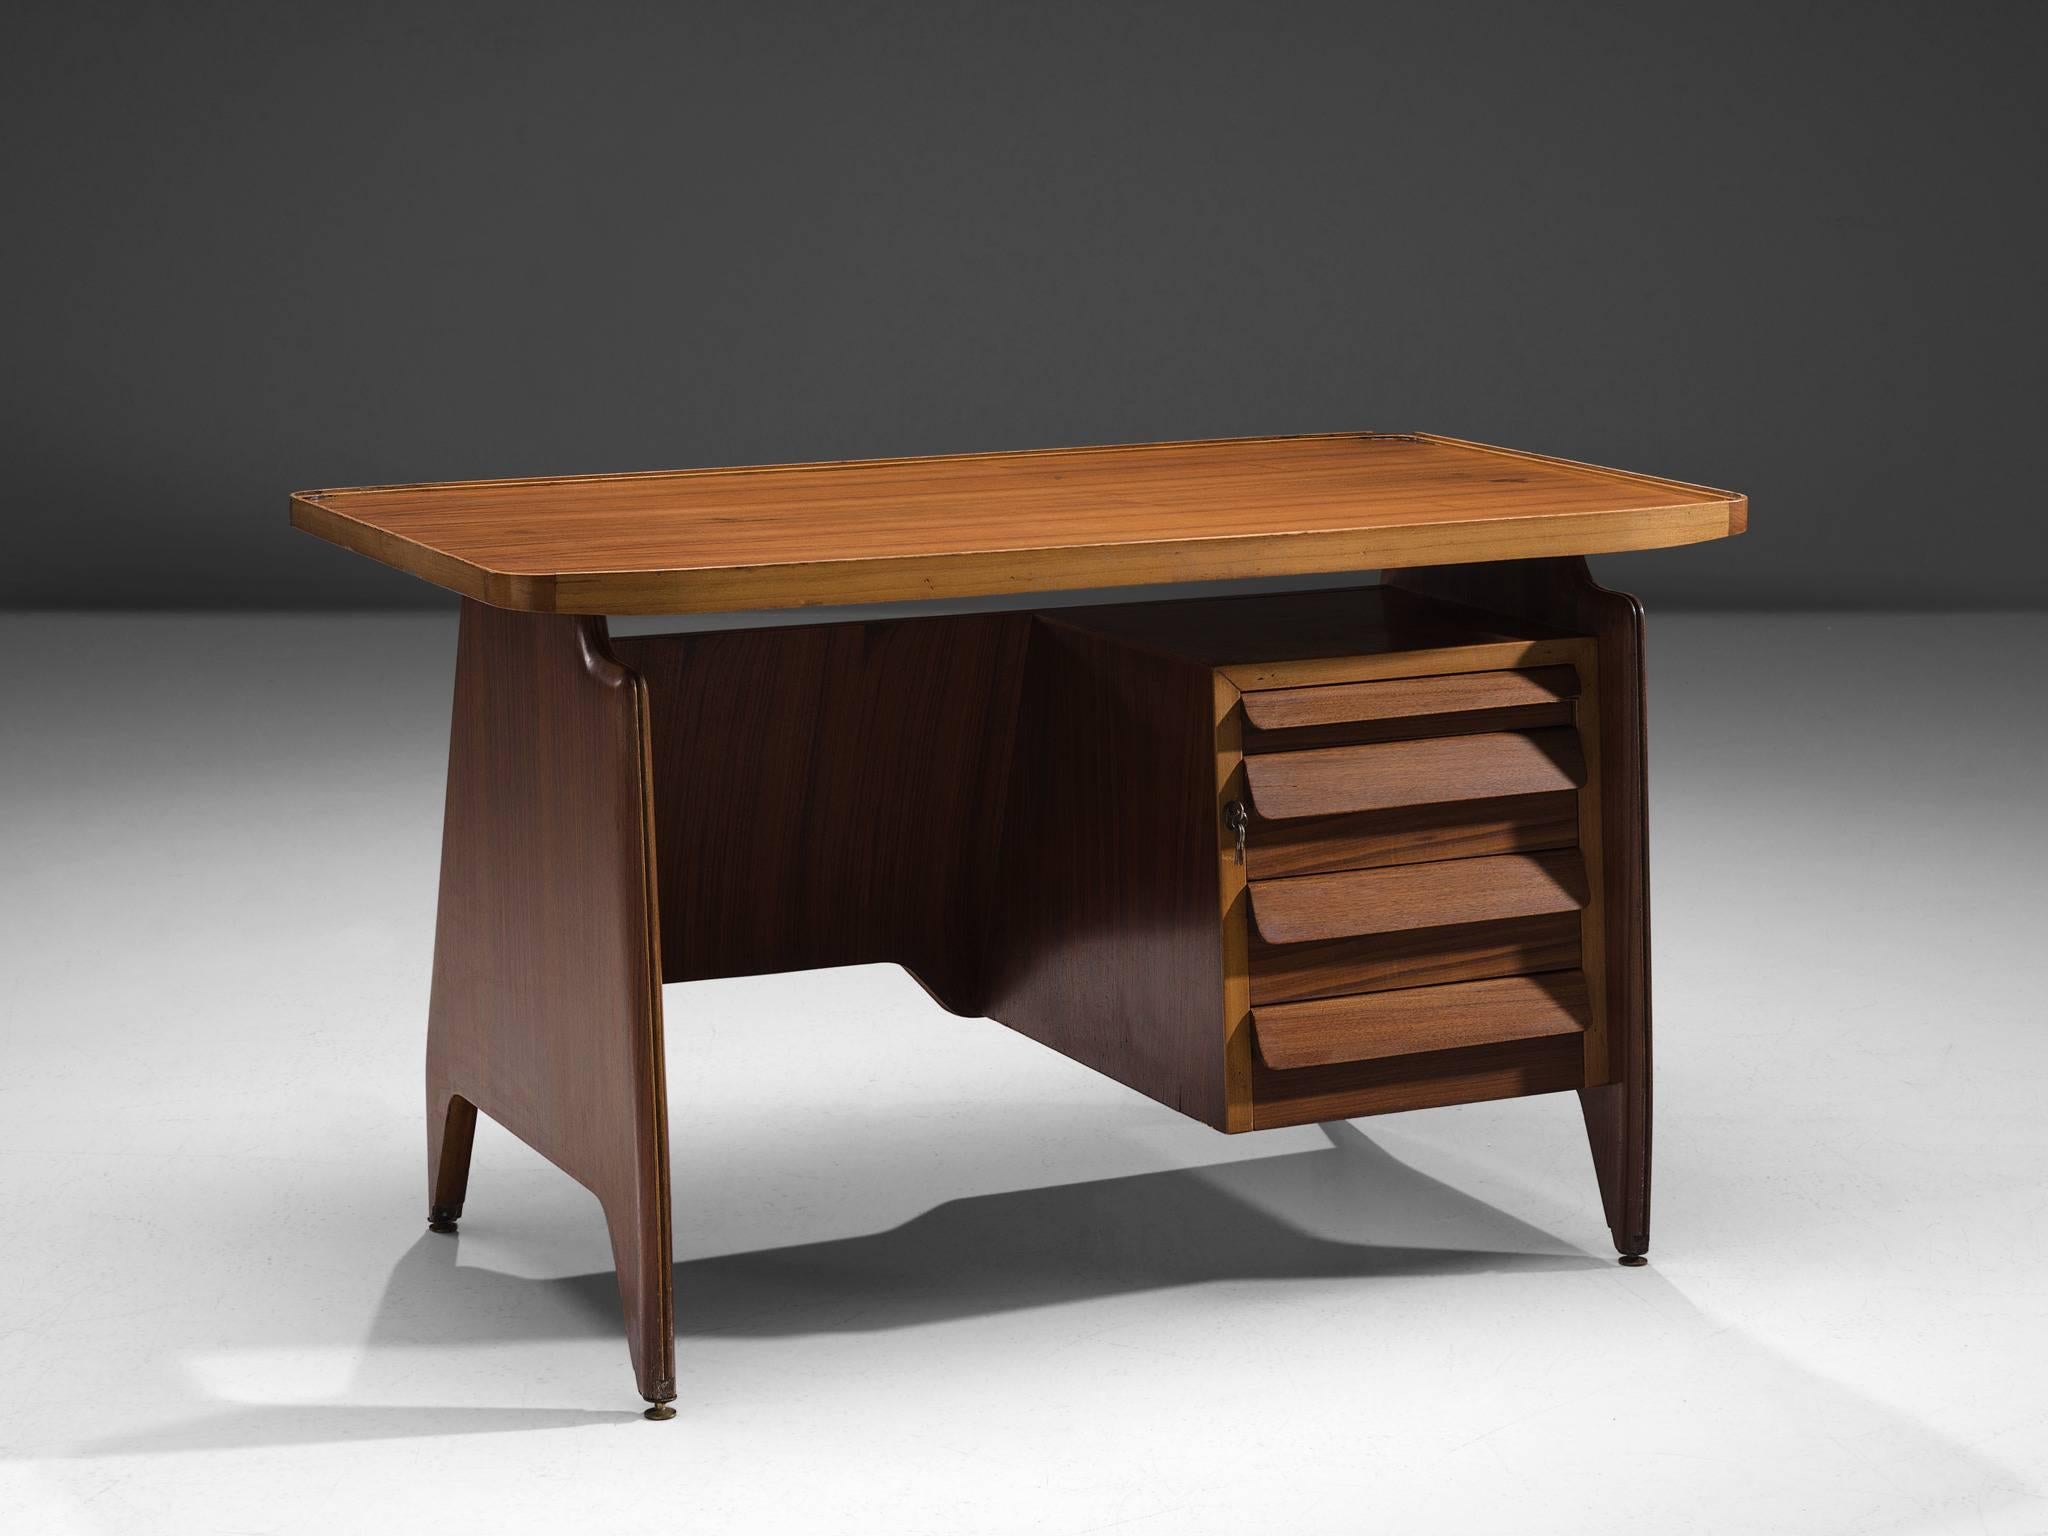 Writing table, walnut, Italy, ca. 1950 

This small writing desk is designed in the 1950s. The design features sharply curved edges combined with fluent, sculptured forms. The piece is in a very good condition. It shows that all elements are made